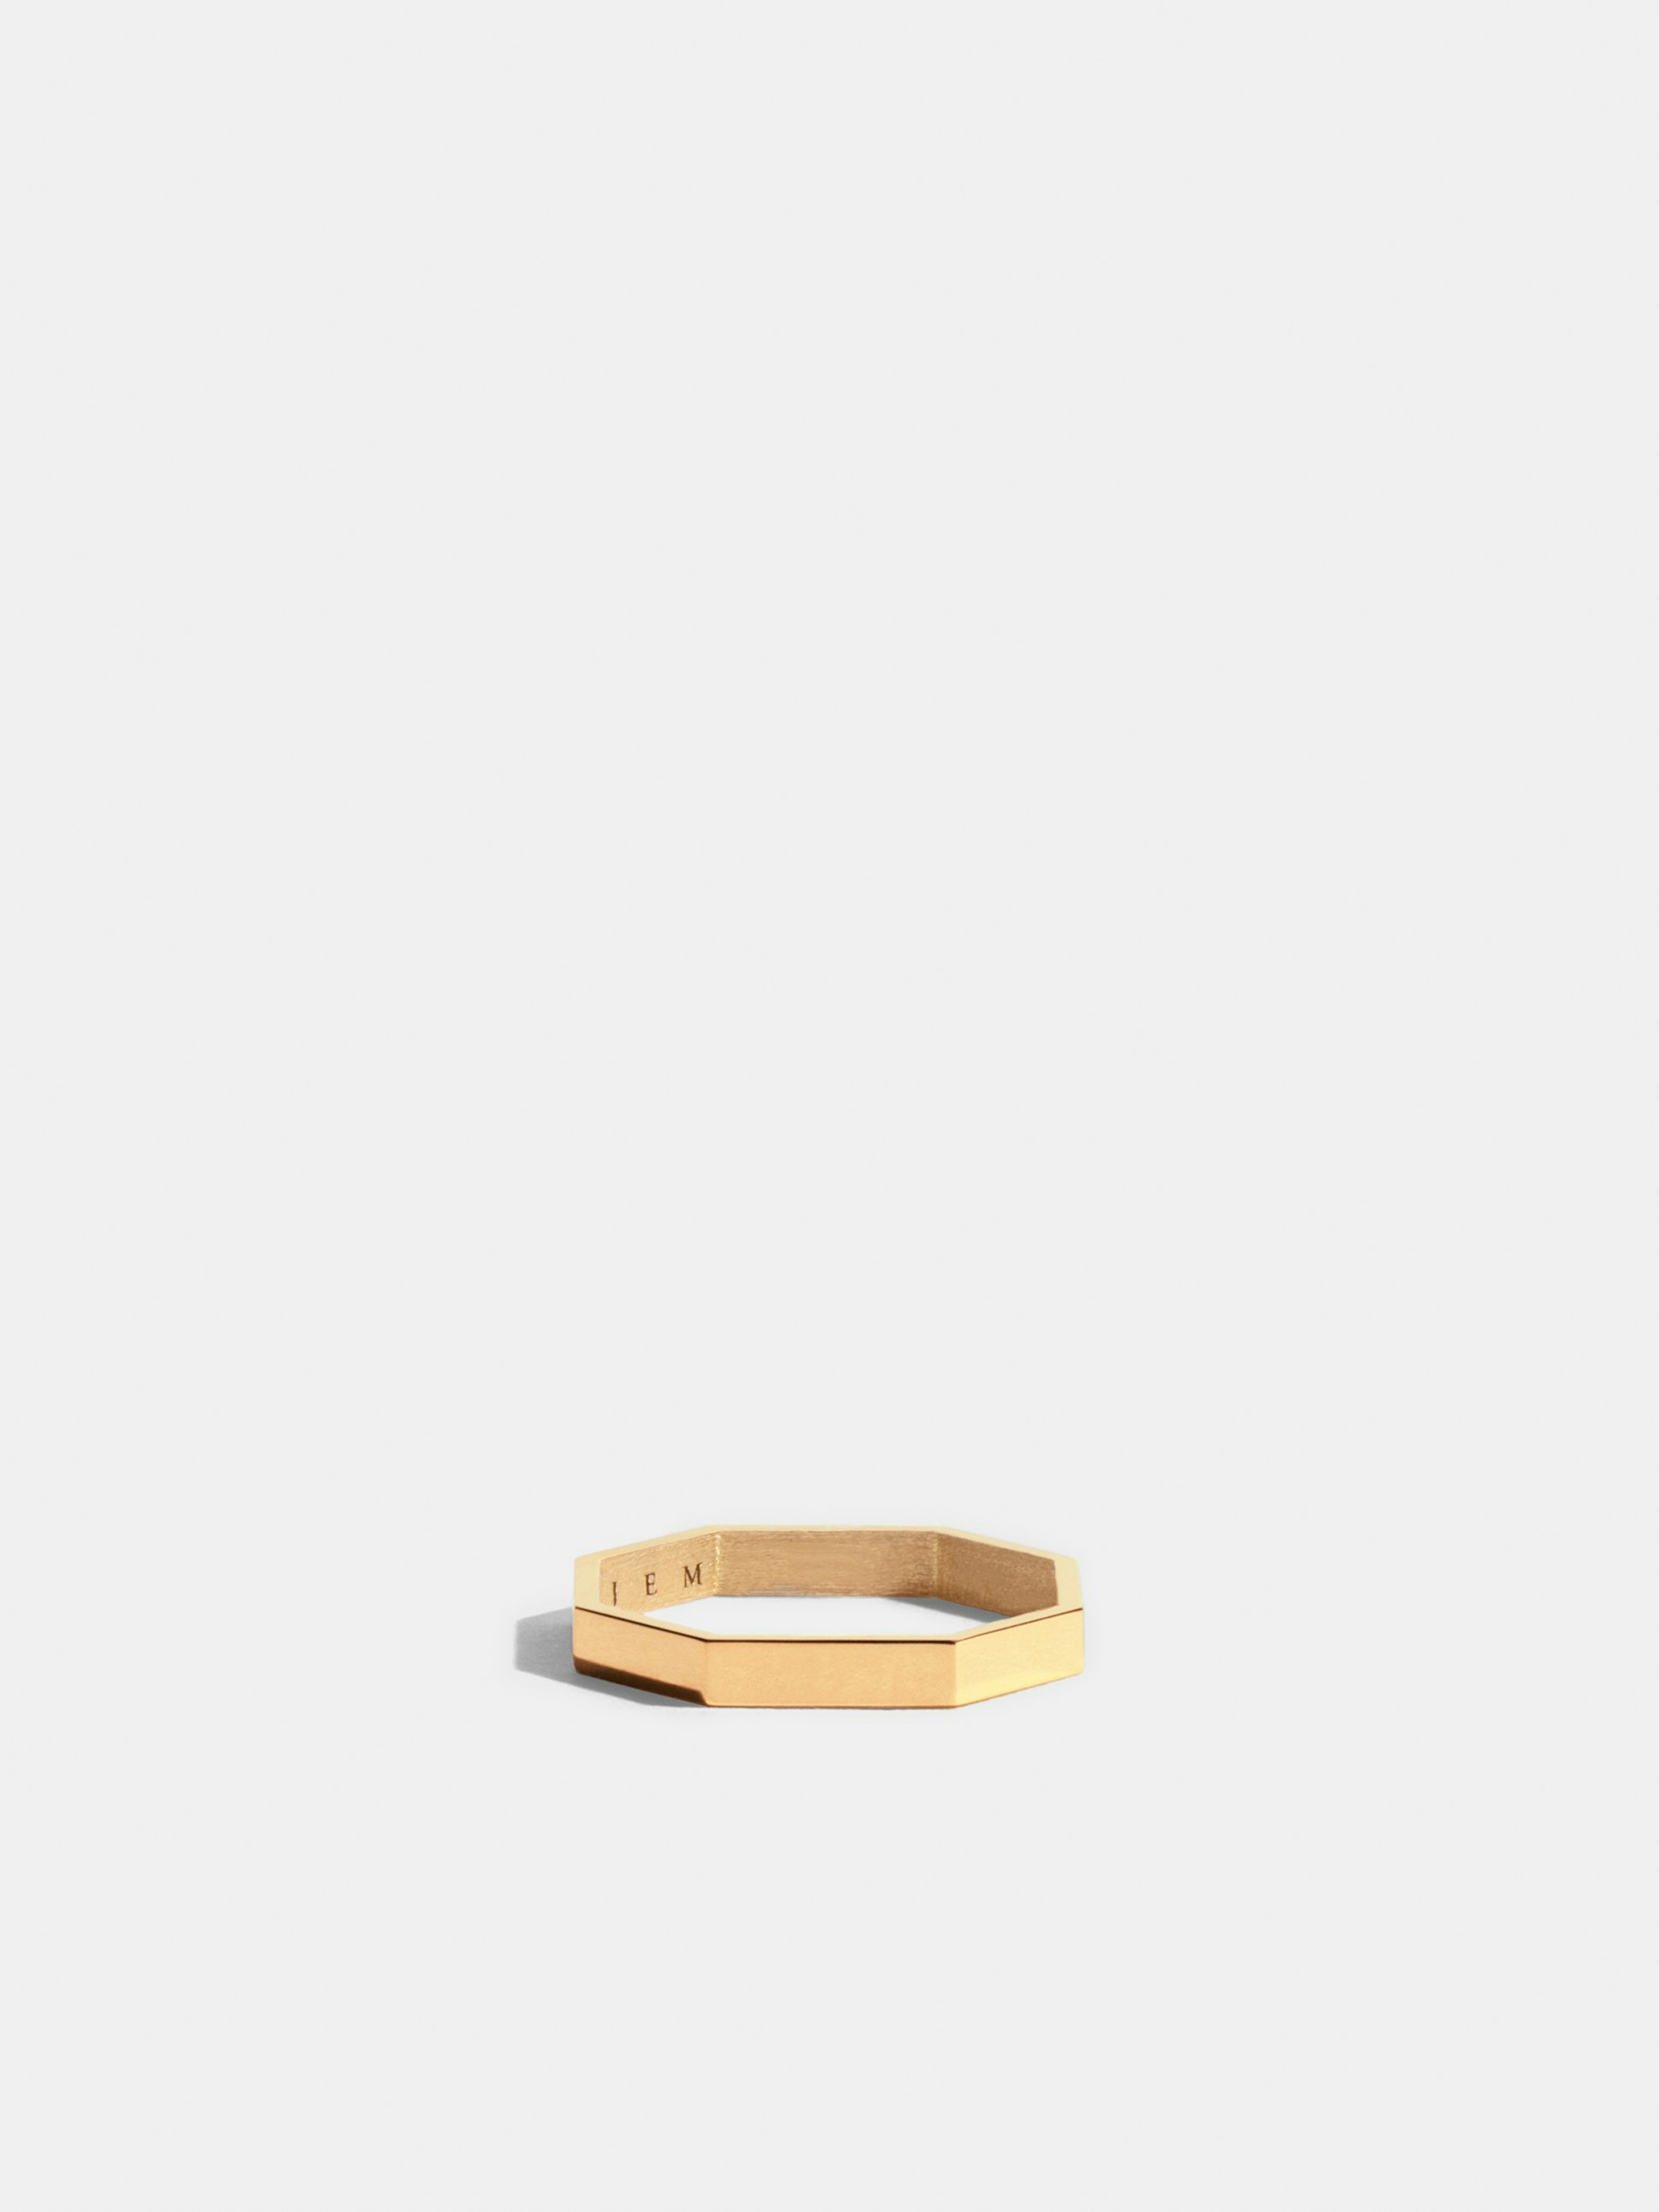 Octogone simple ring in 18k Fairmined ethical yellow gold